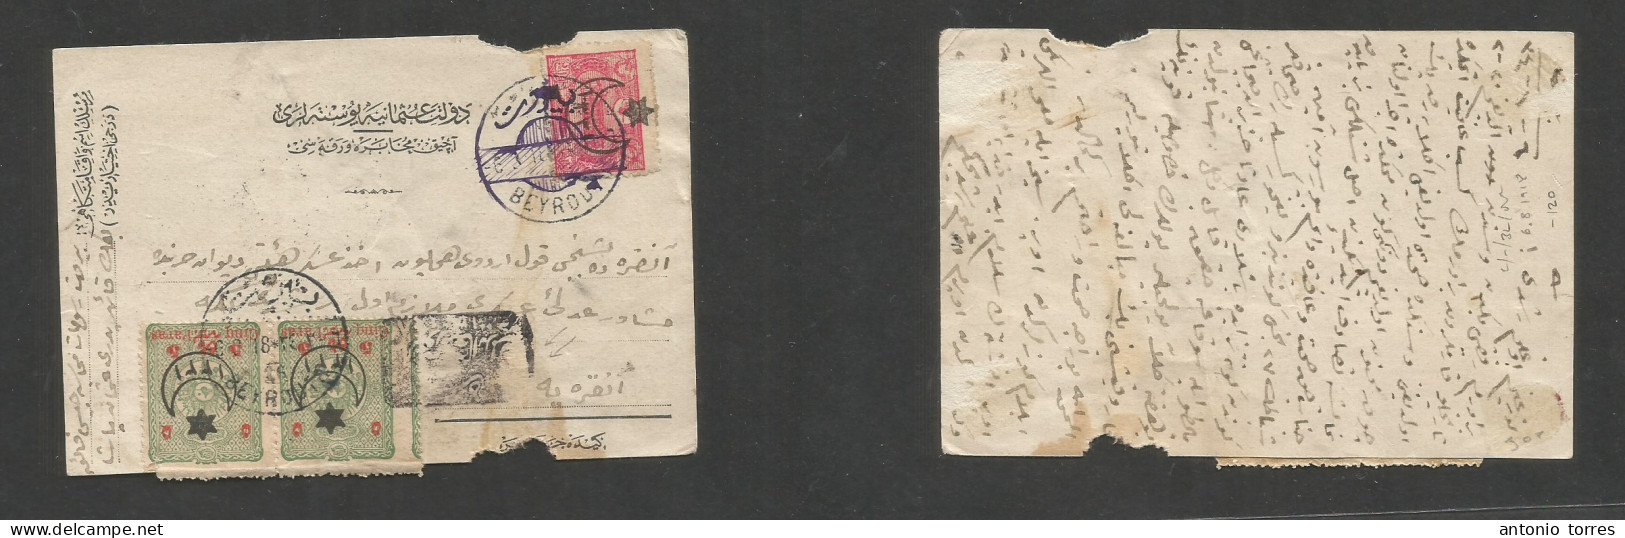 Lebanon. 1918 (6 Aug) Turkish PO, Beyrouth, Local Multifkd Private Card. Late WWI Period Usage + Censor Cachet. Scarce I - Liban